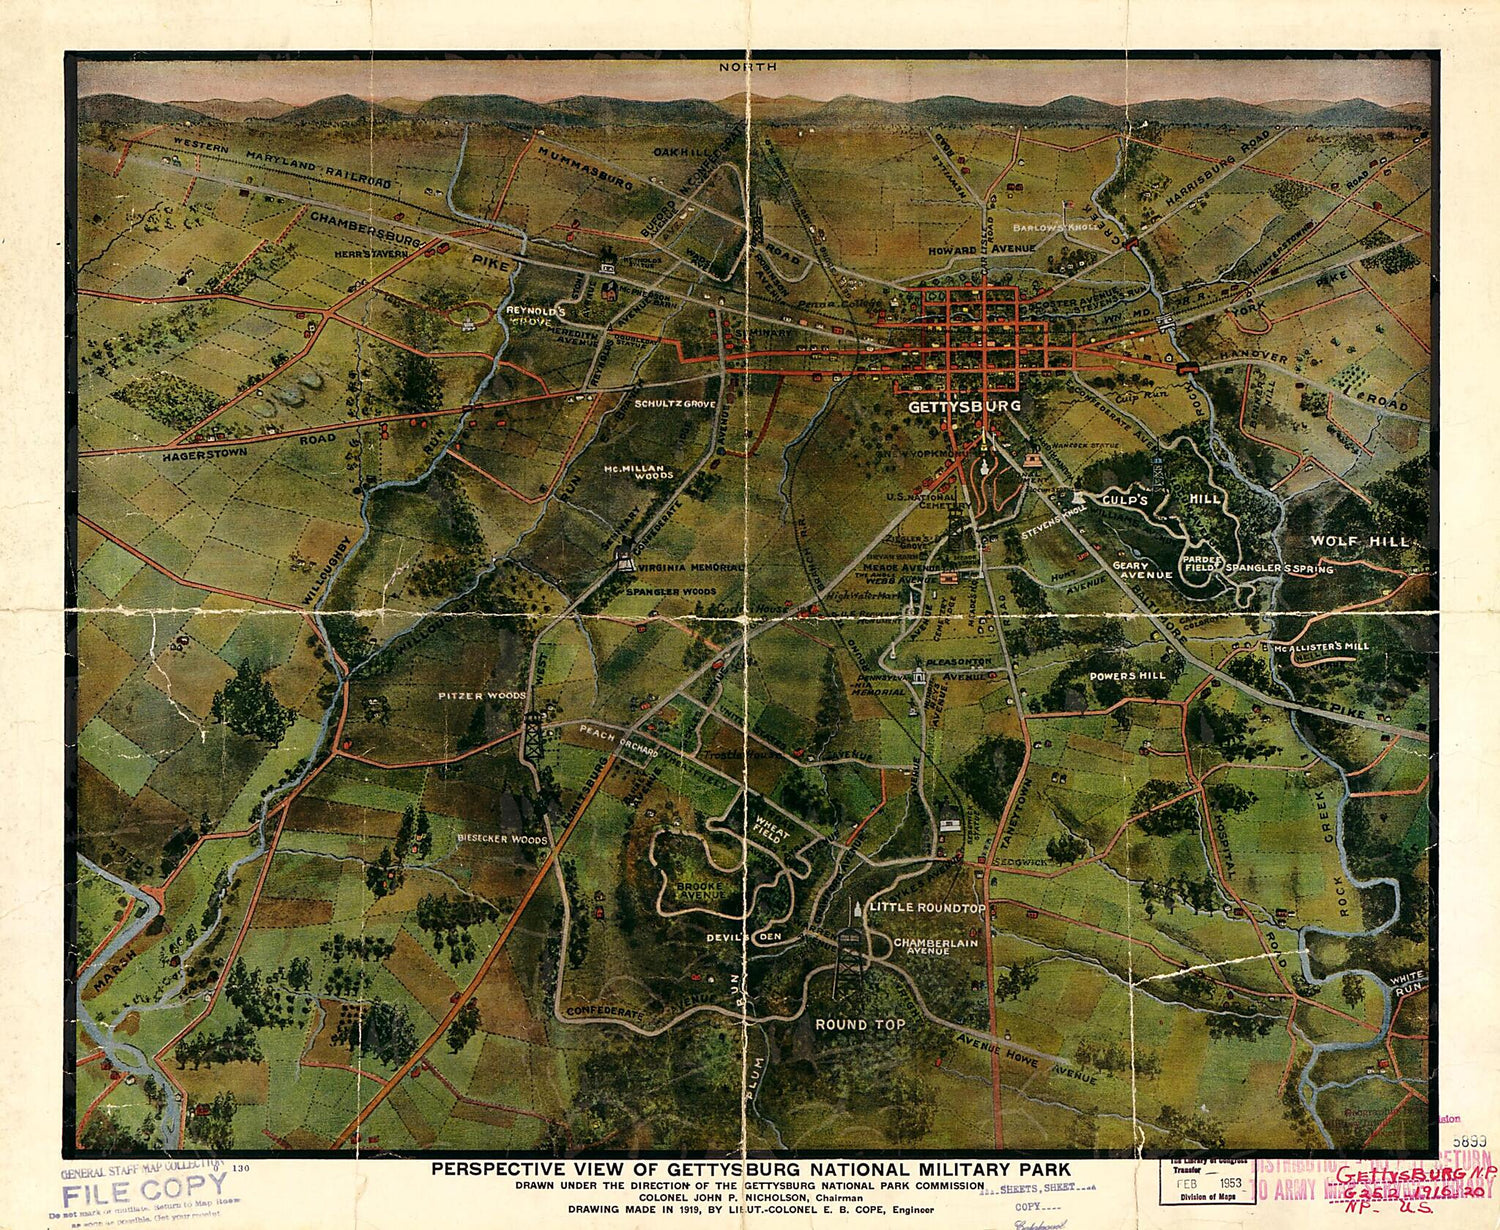 This old map of Perspective View of Gettysburg National Military Park from 1919 was created by Emmor B. Cope in 1919